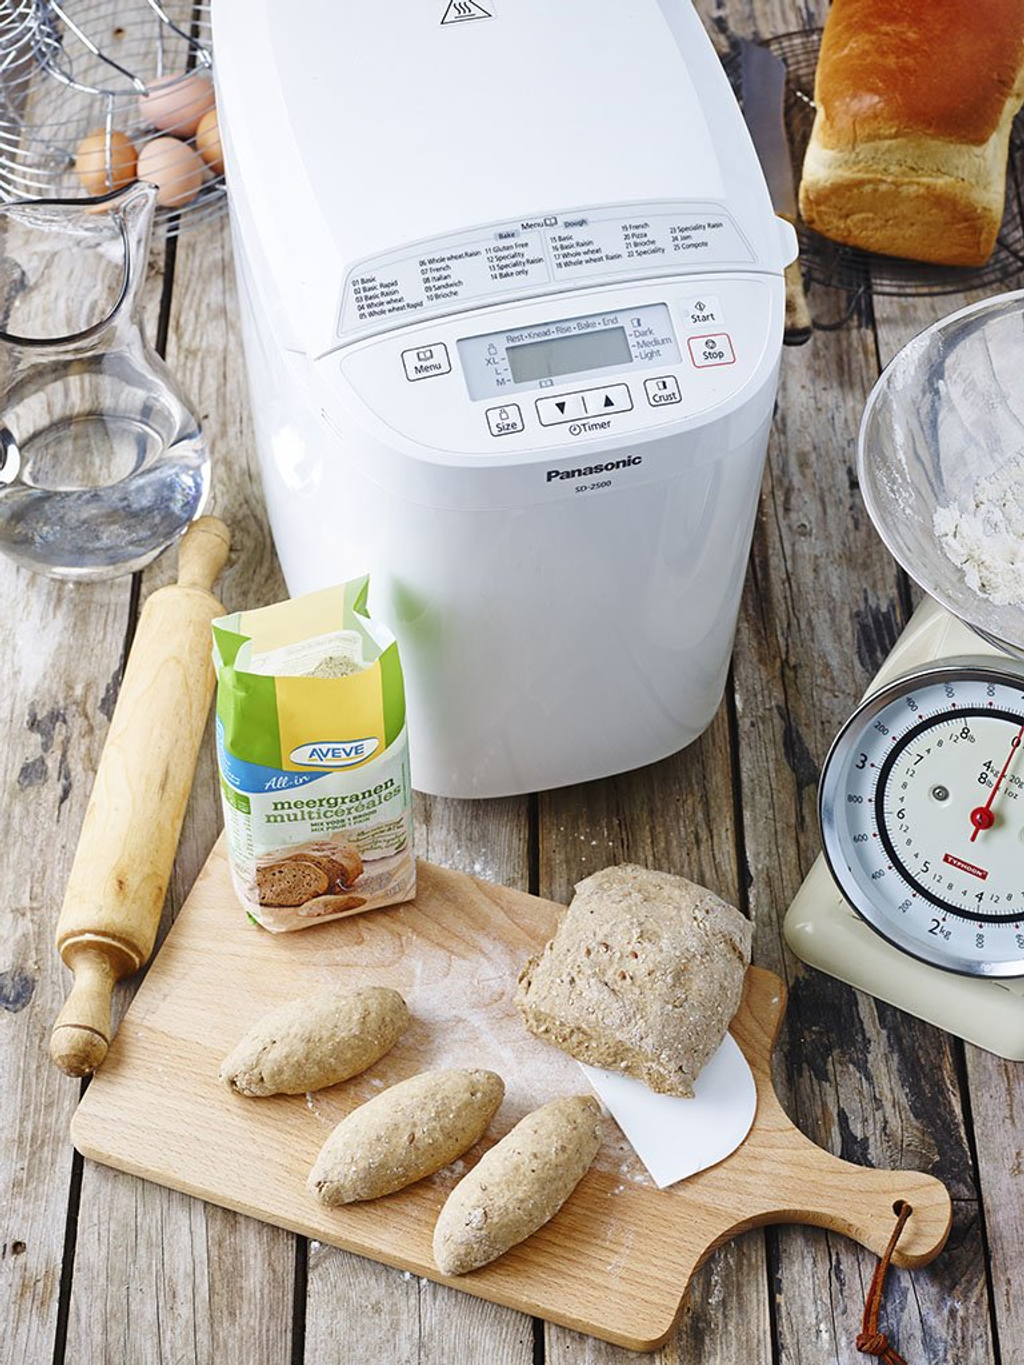 Rent the Panasonic SD-2500WXE bread maker from BIYU and bake fresh bread at home. Perfect for white, whole wheat, sourdough or gluten-free bread.